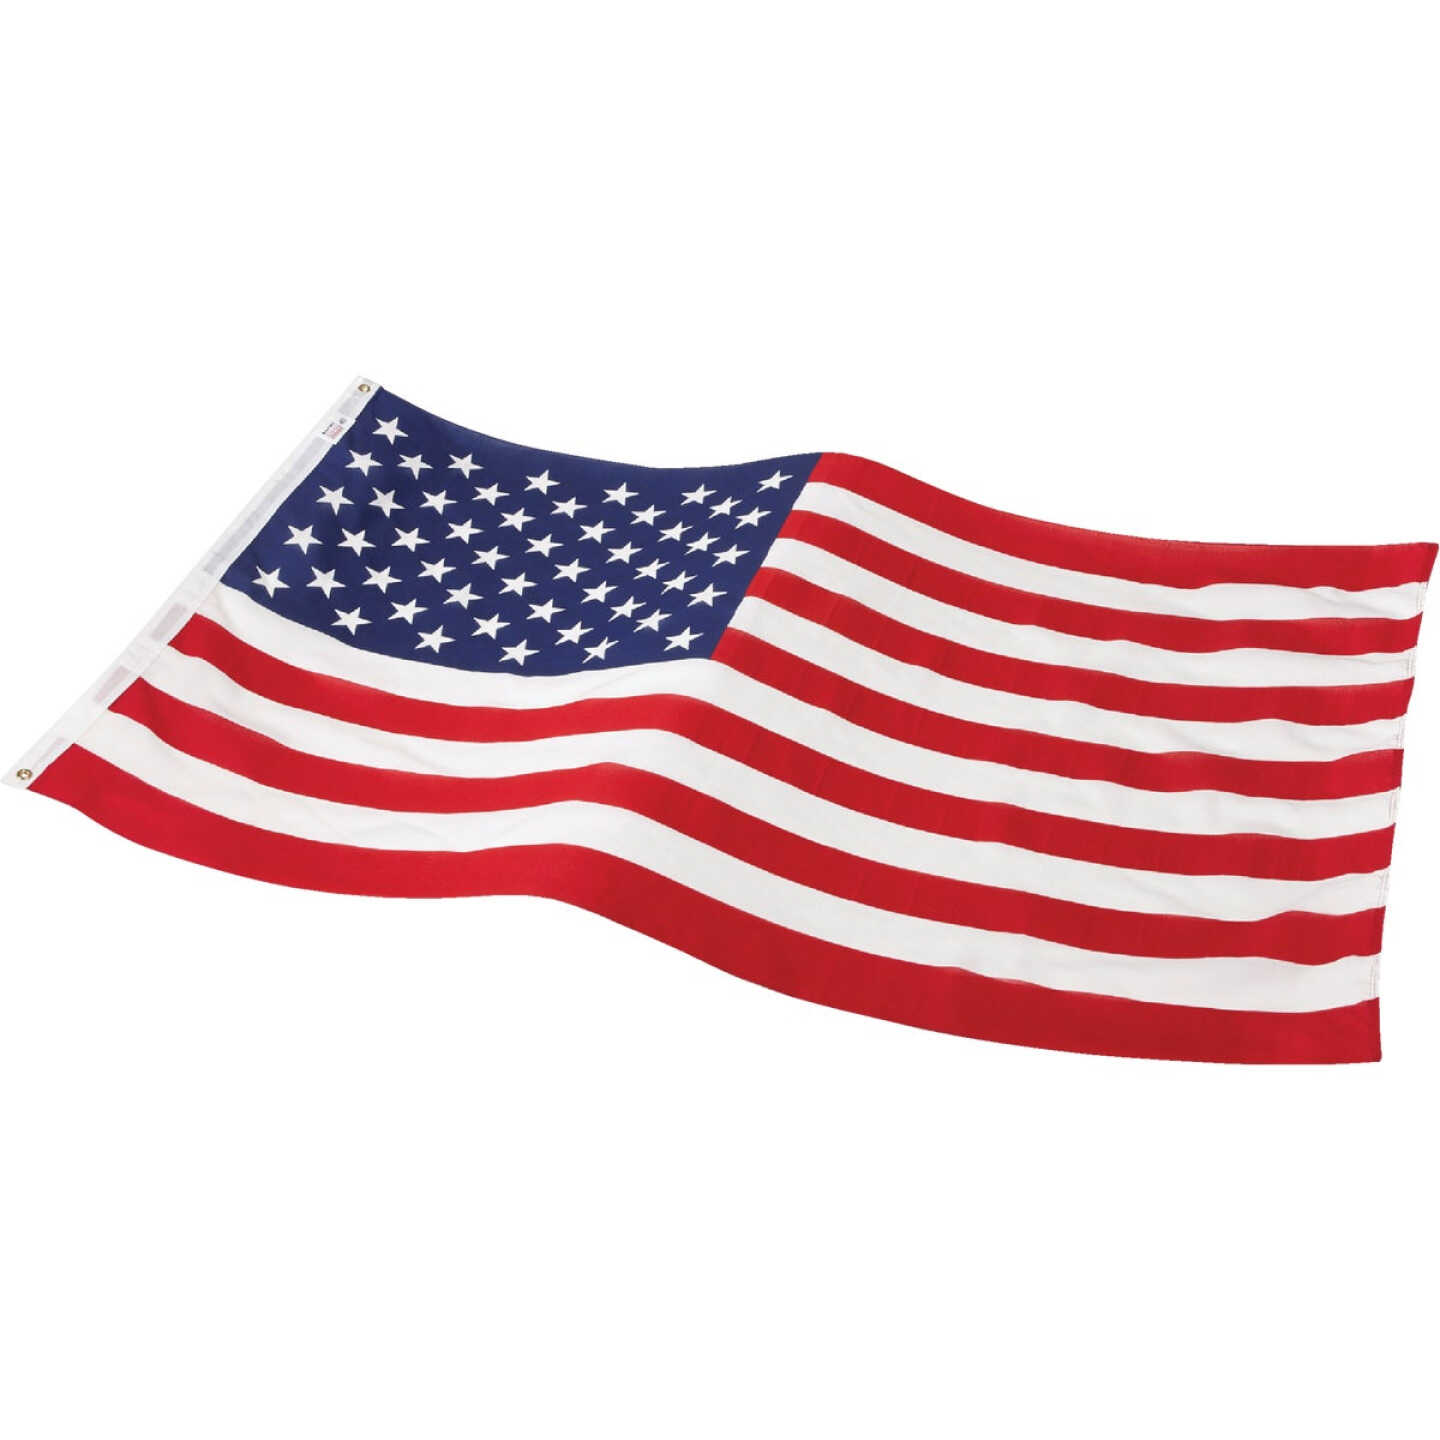 Valley Forge 3 Ft. x 5 Ft. Polycotton American Flag Image 3